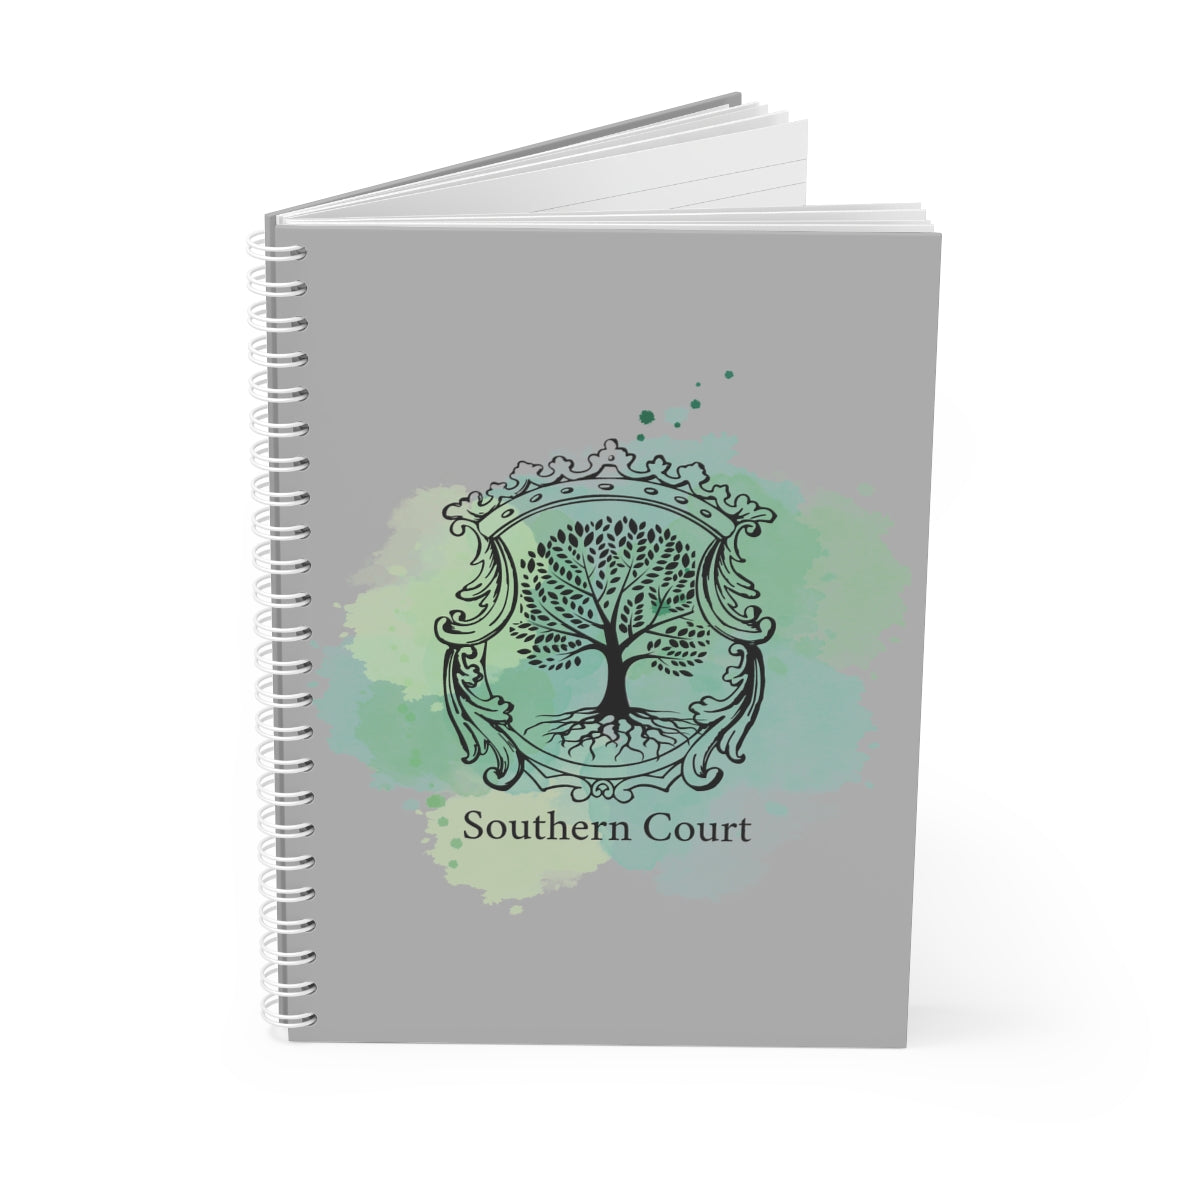 The Southern Court Spiral Notebook